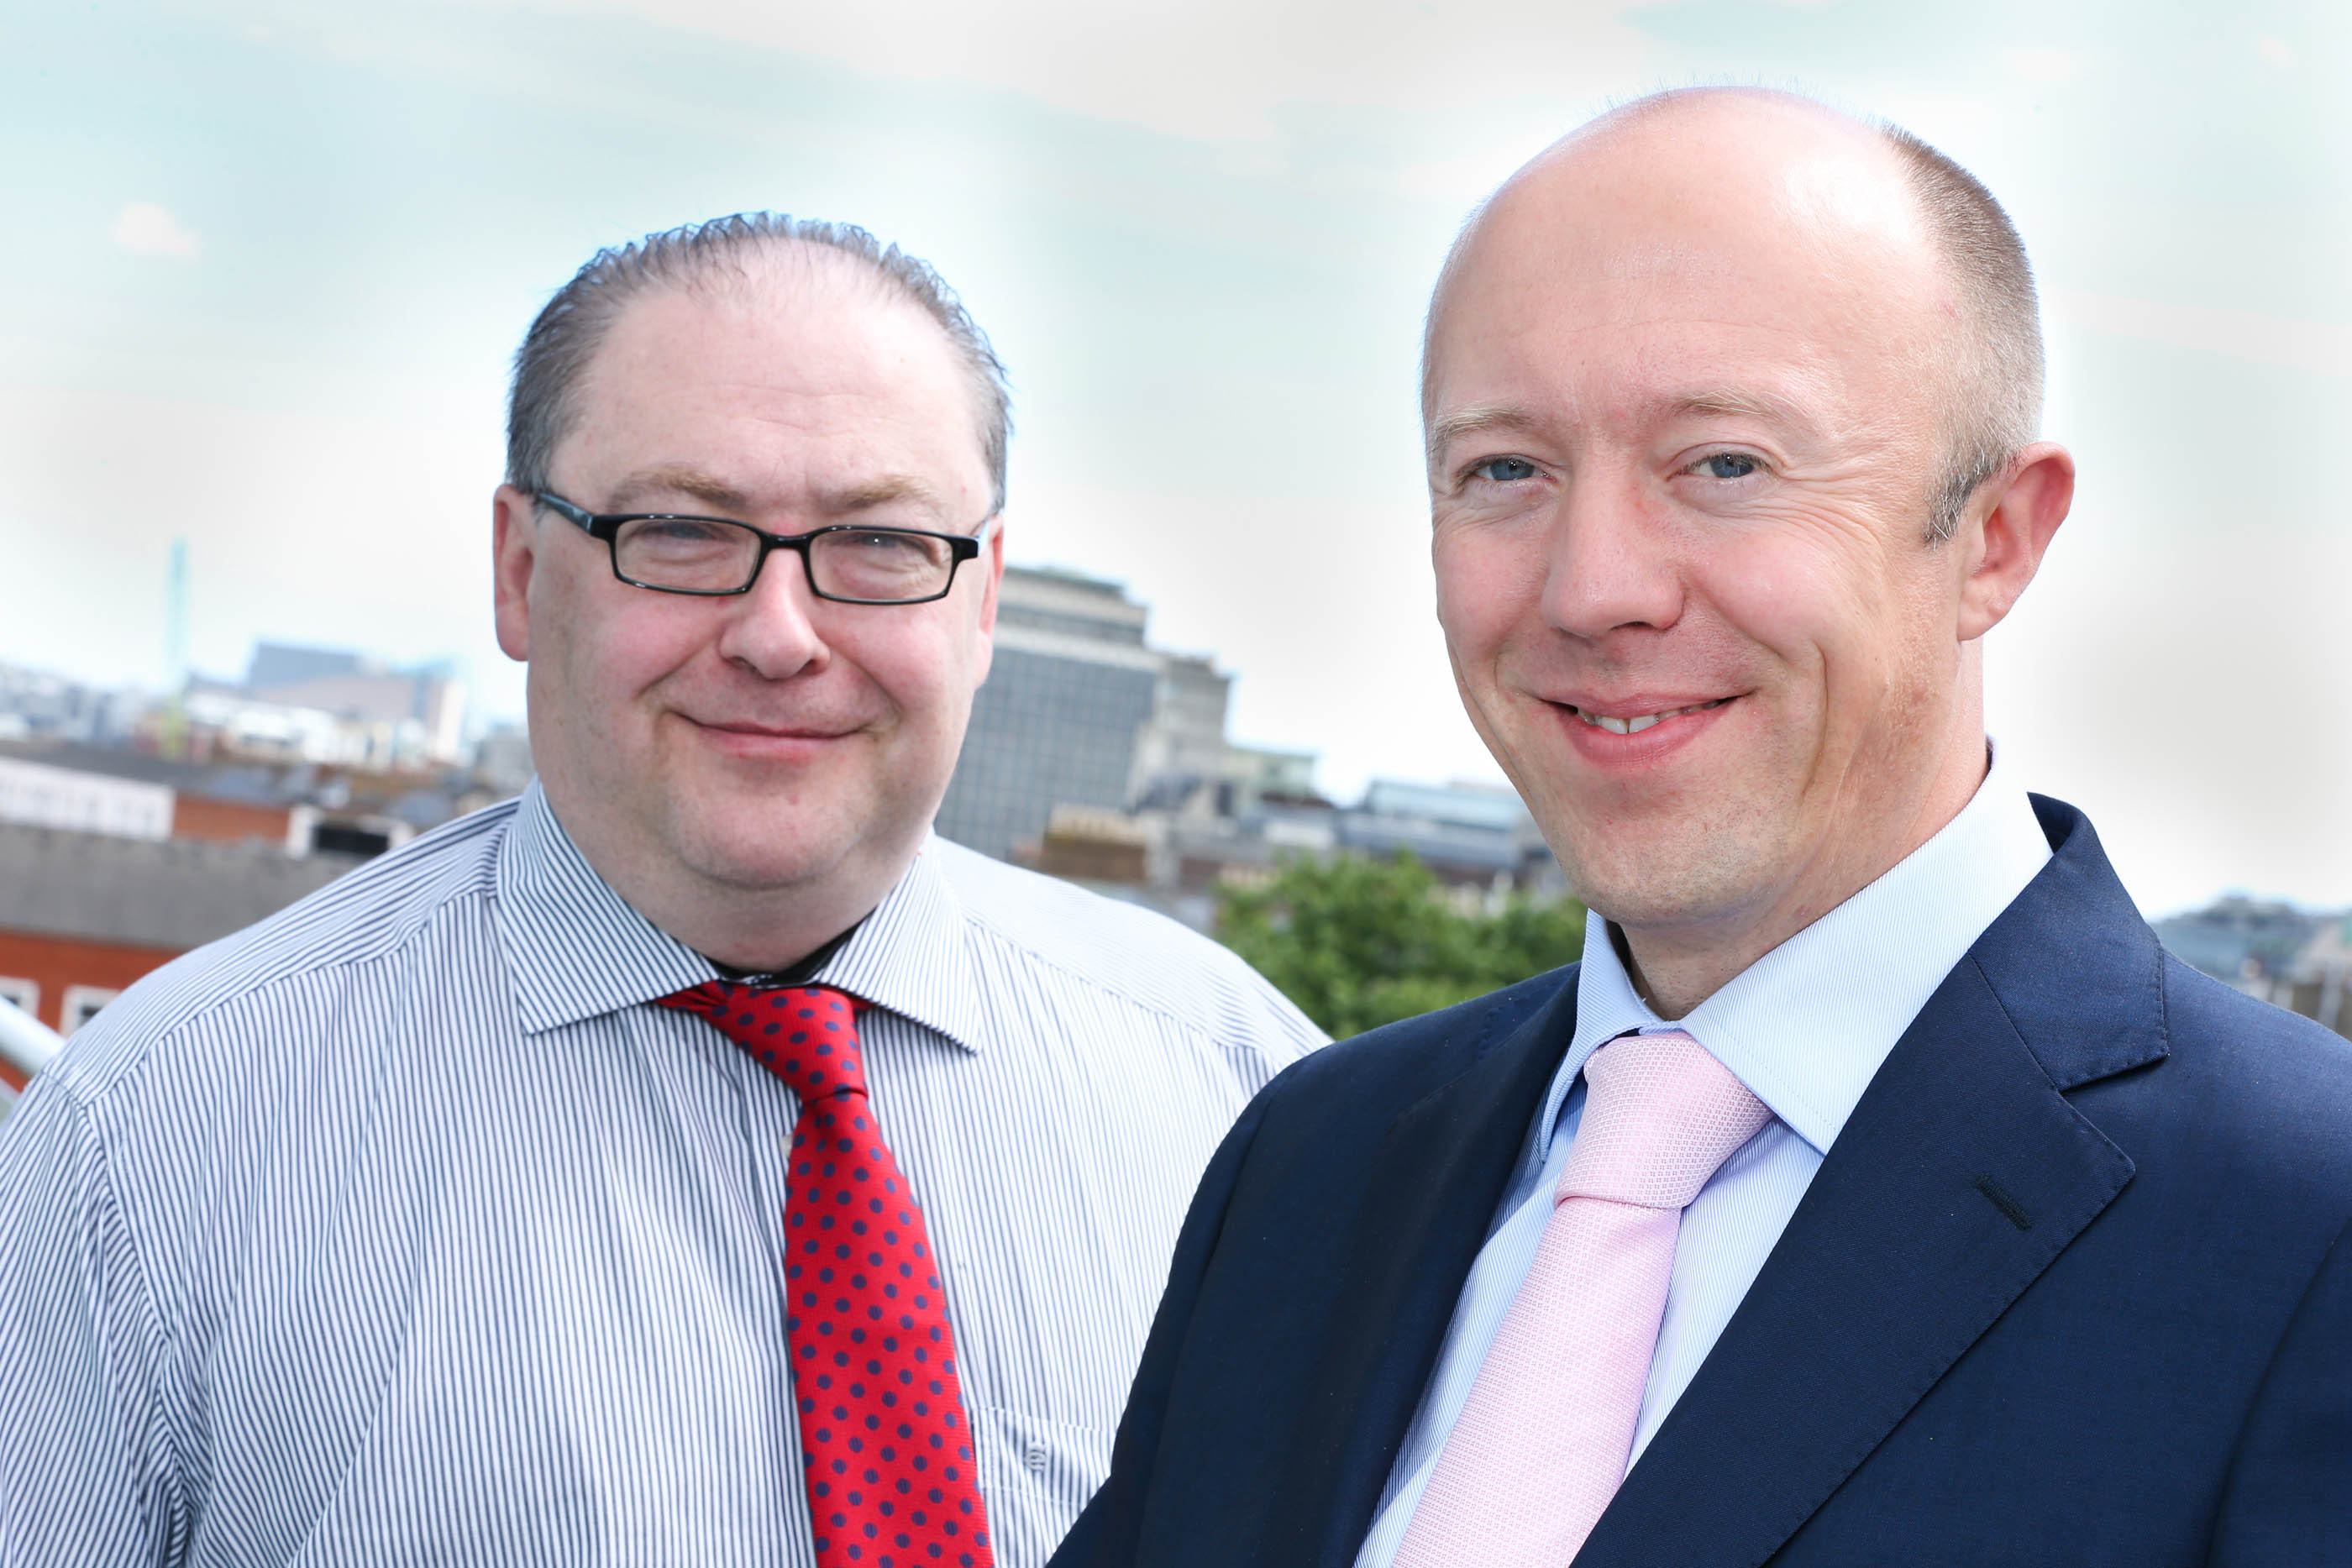 Pictured announcing the deal: Andrew Hillis, Group Head of Information Services, at Almac Group (Left) and Tom O'Connor, Director, Version 1 (Right).